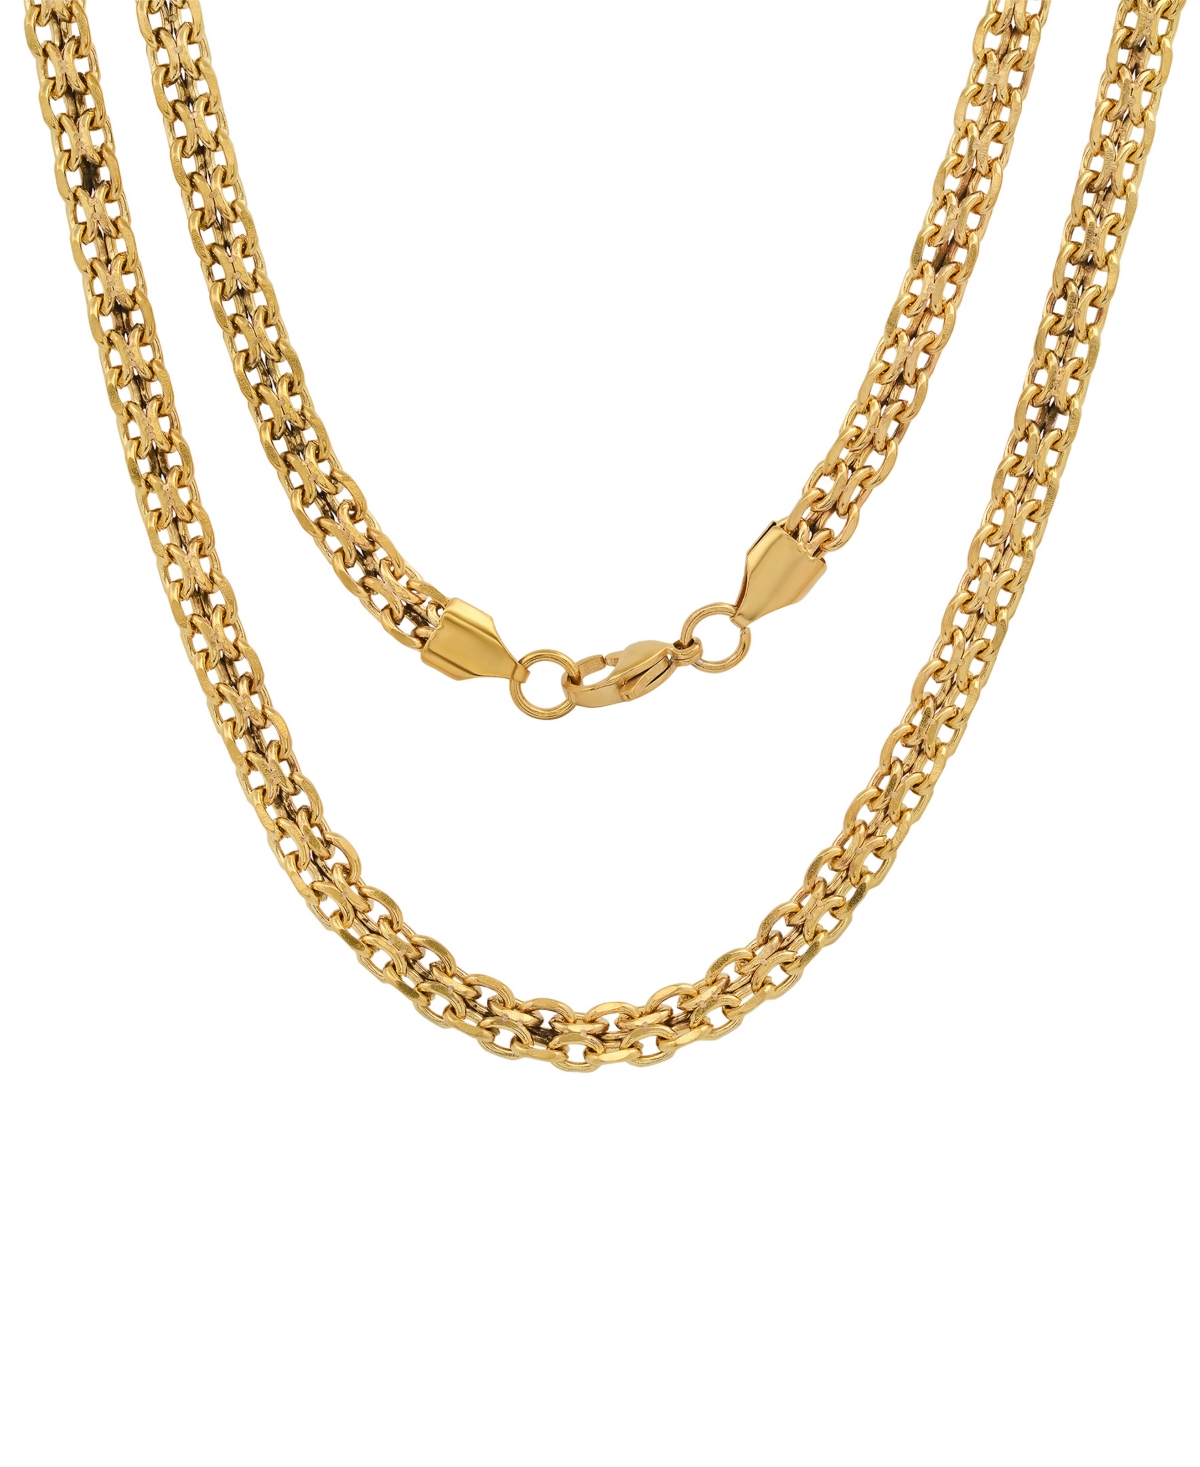 Hmy Jewelry 18k Gold Plated Bismarck Mesh Chain Link Necklace